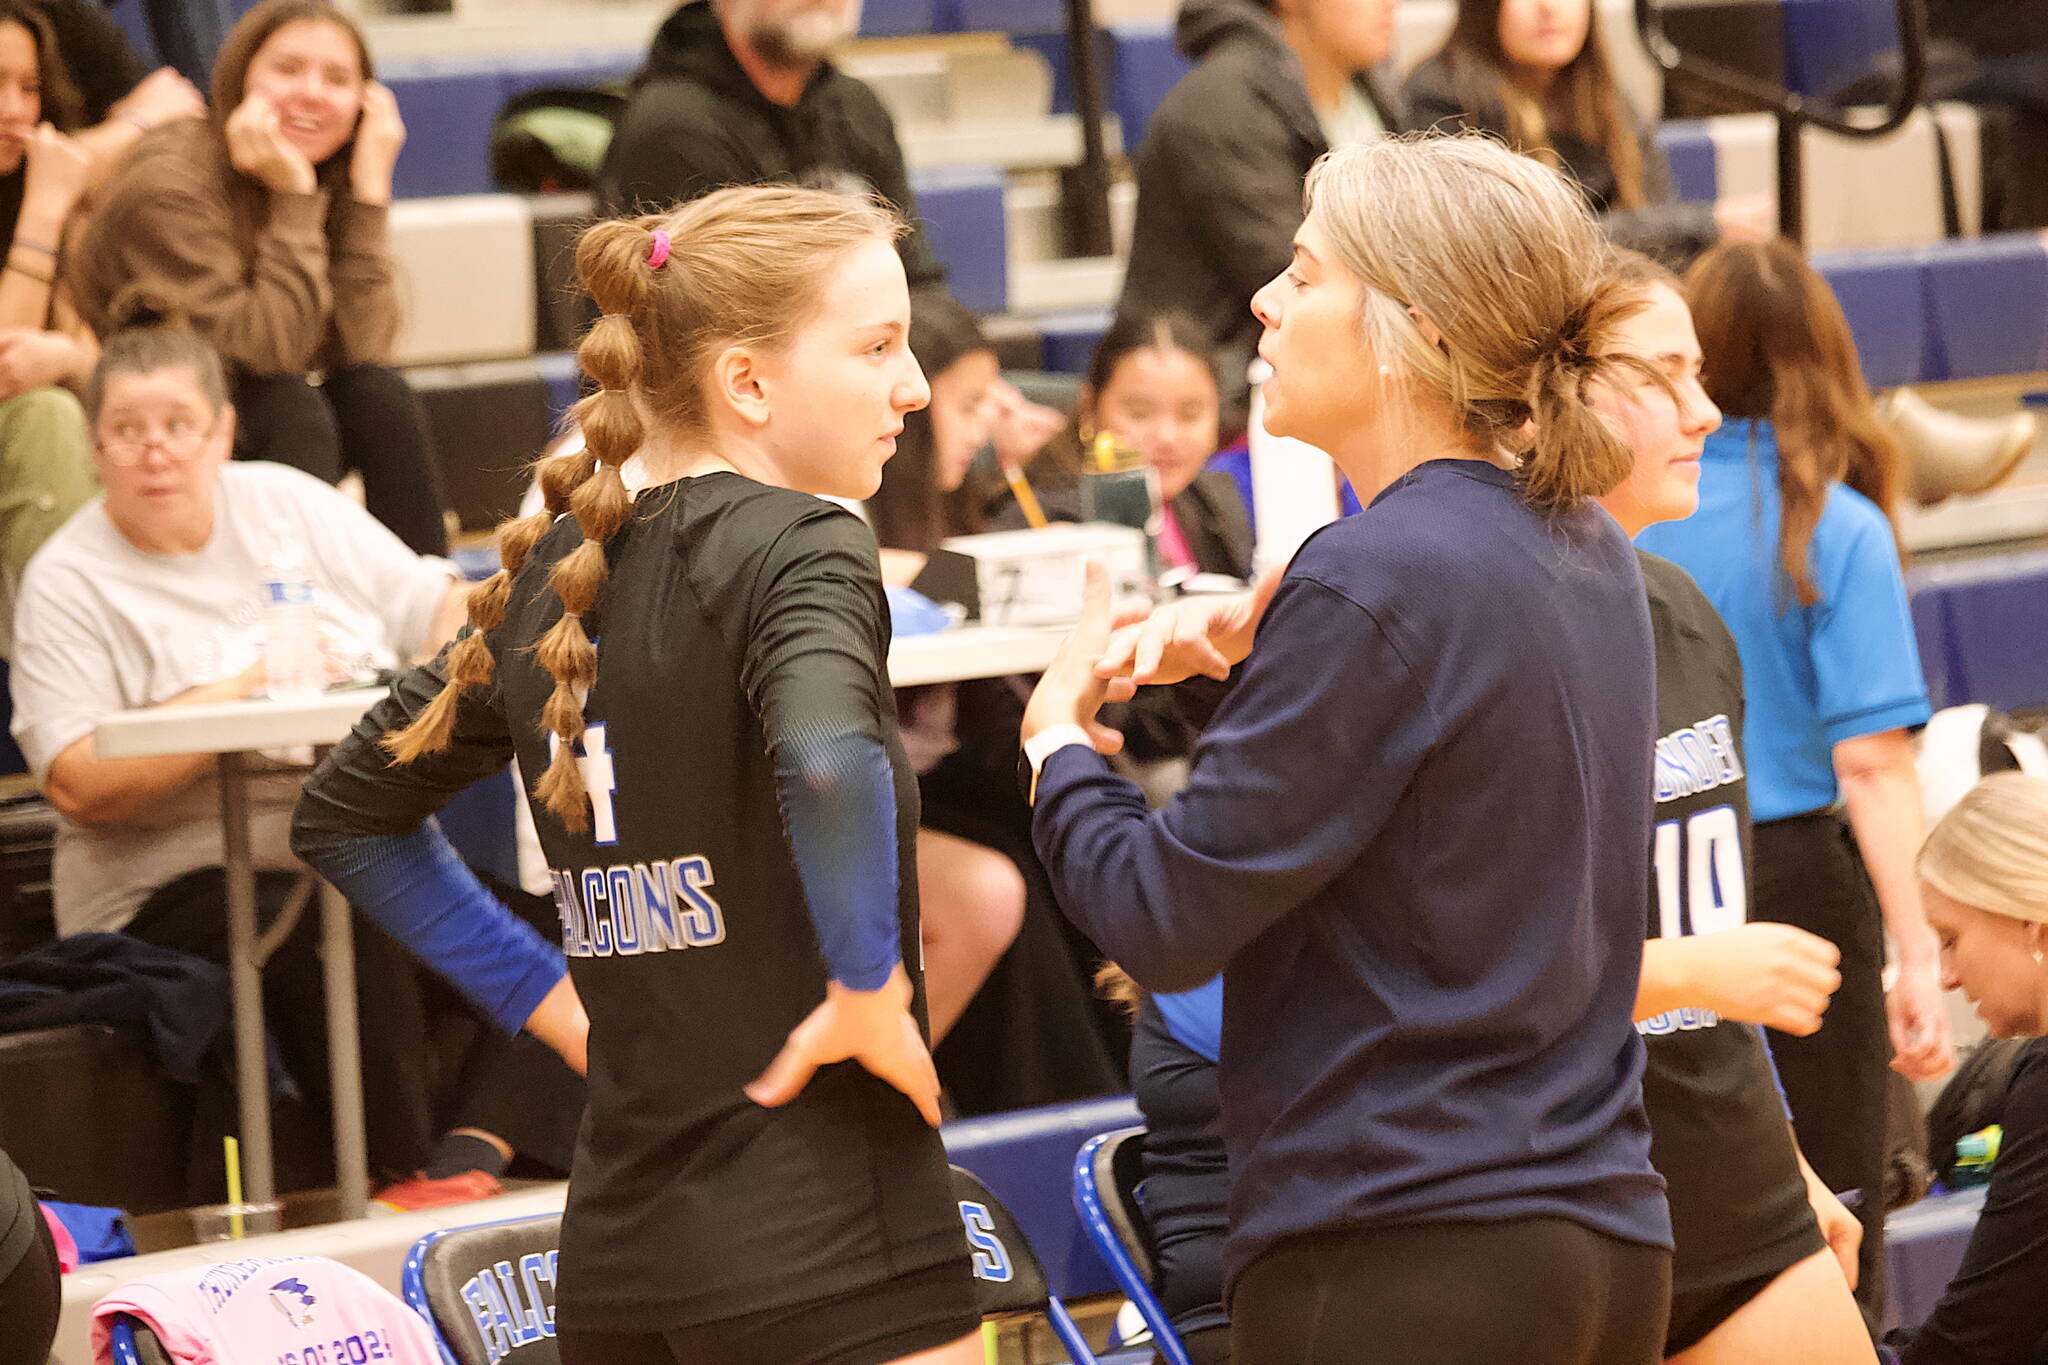 Thunder Mountain High School volleyball coach Julie Herman confers with Jenna Dobson during a timeout in Saturday’s game against Mt. Edgecumbe High School at TMHS. (Mark Sabbatini / Juneau Empire)